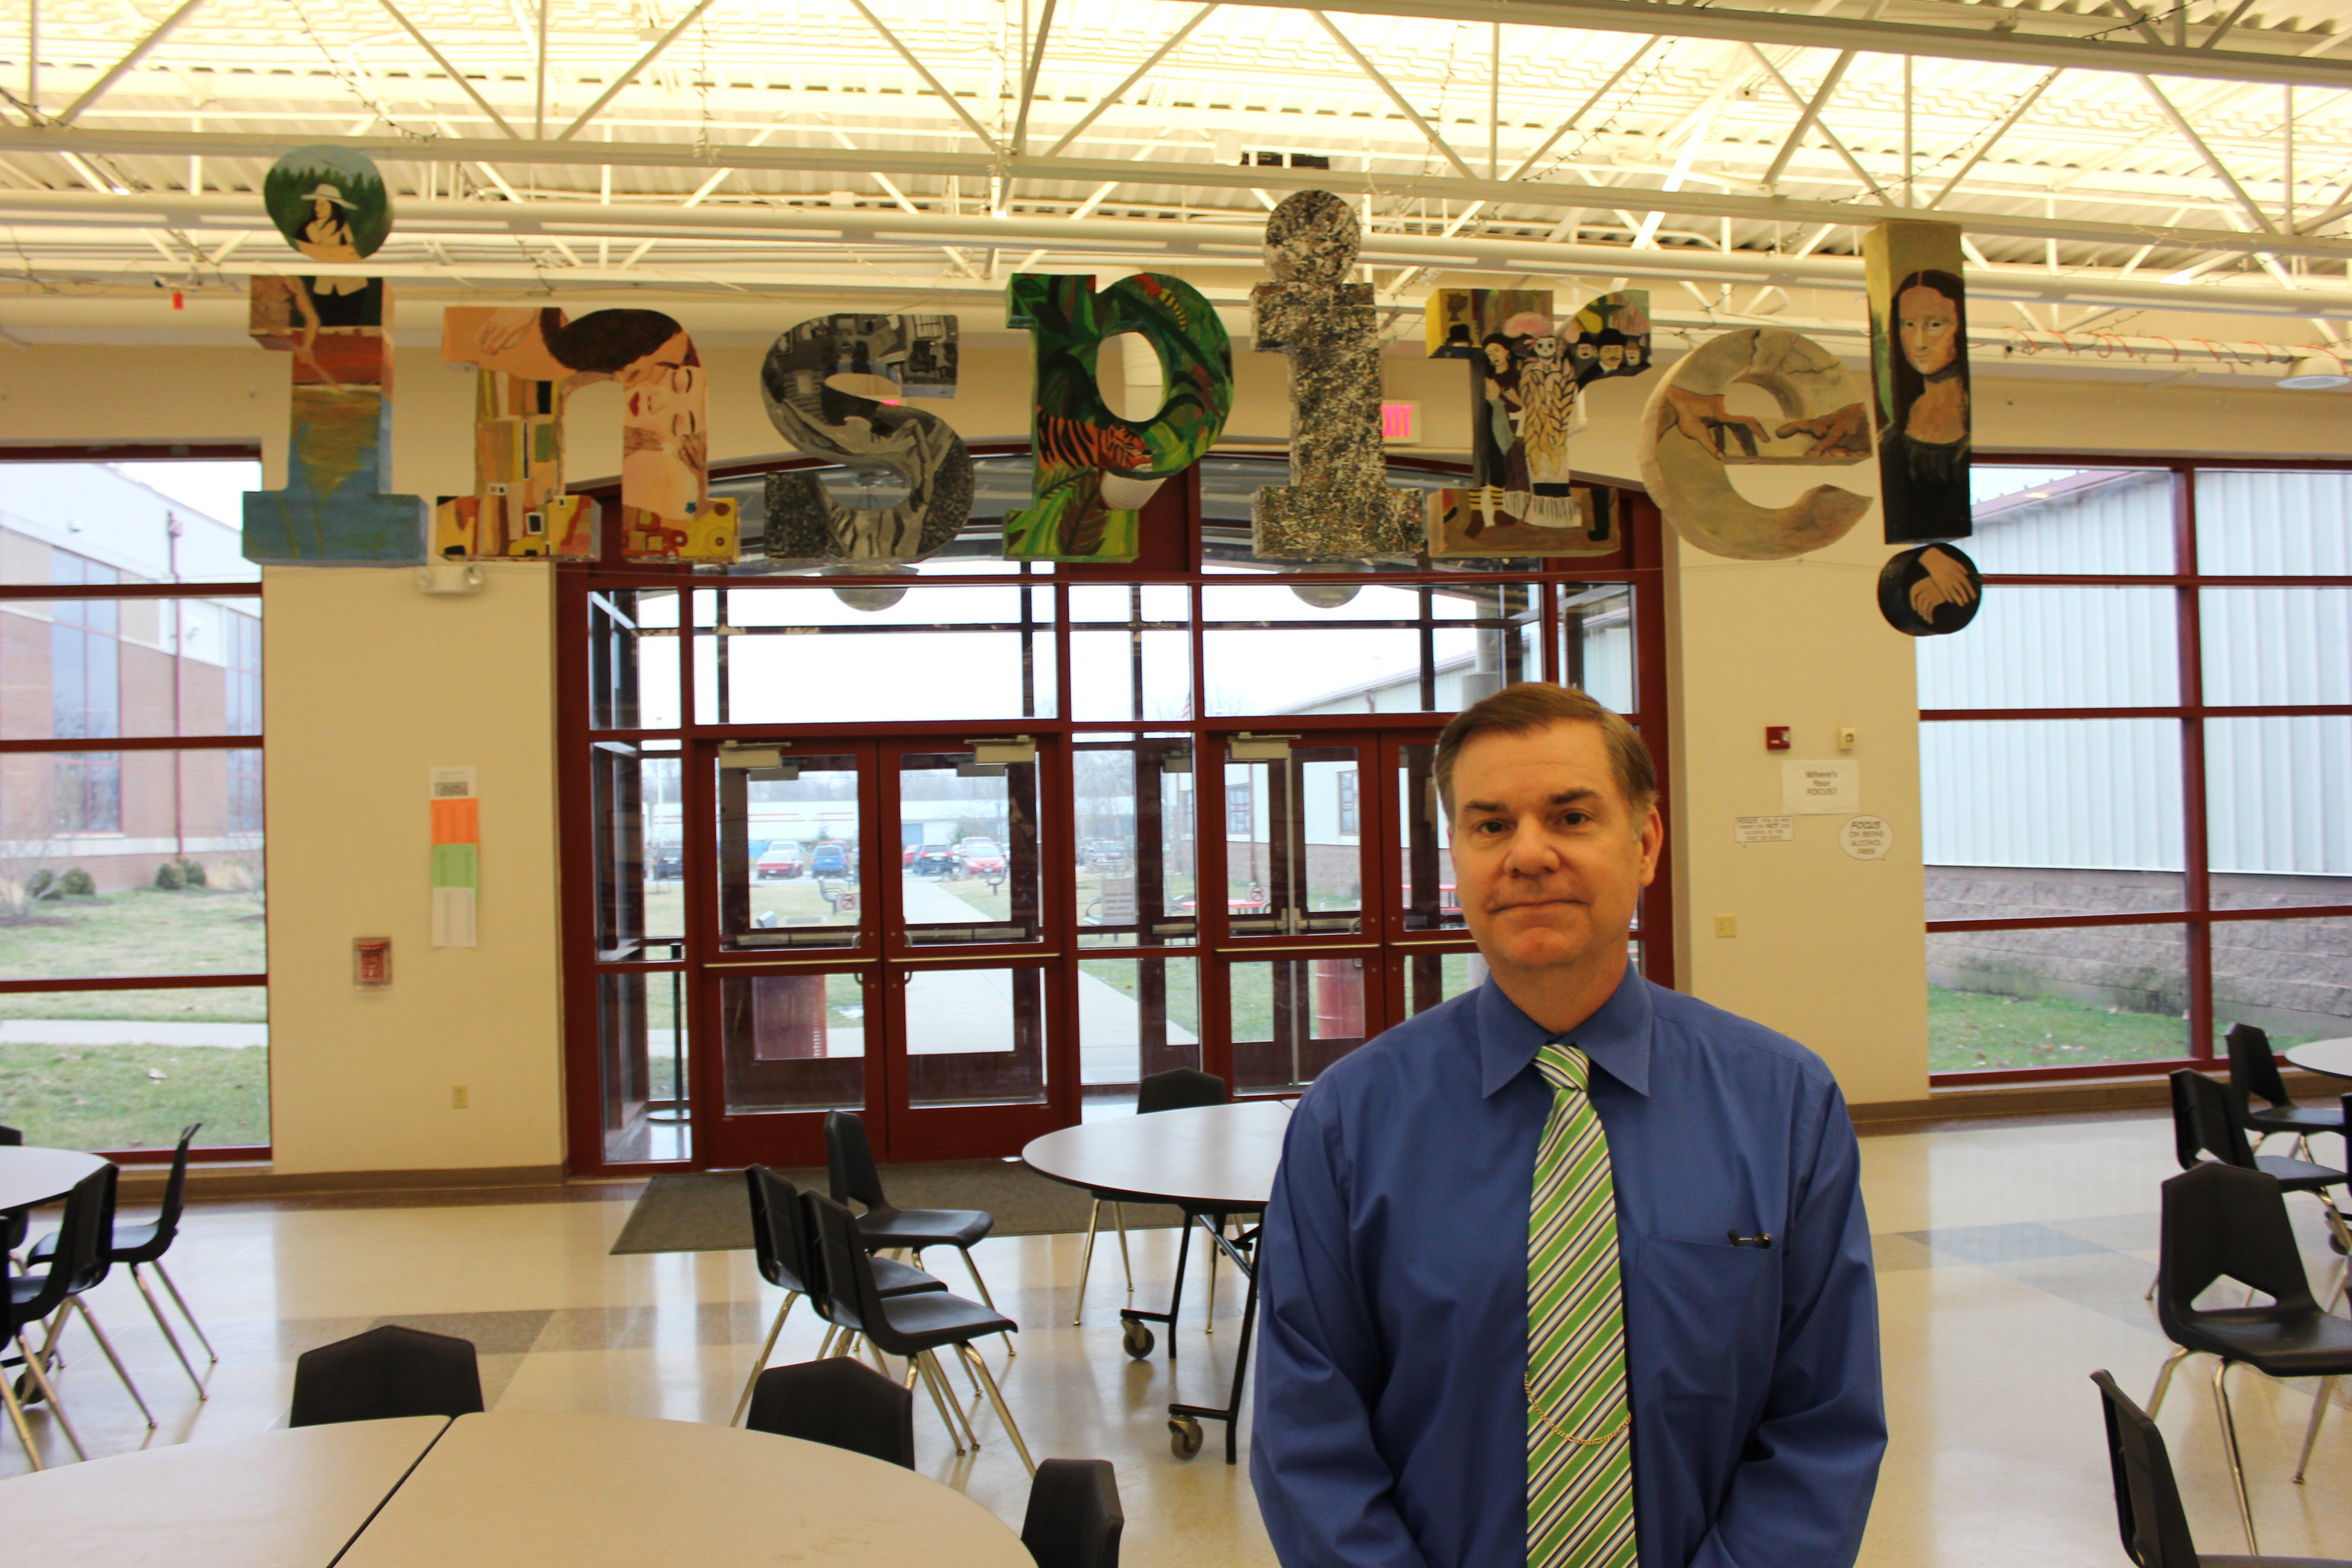 Principal Scott Riddle stands in front of an “inspirational” art installation created by the students at Beardstown Junior/High.